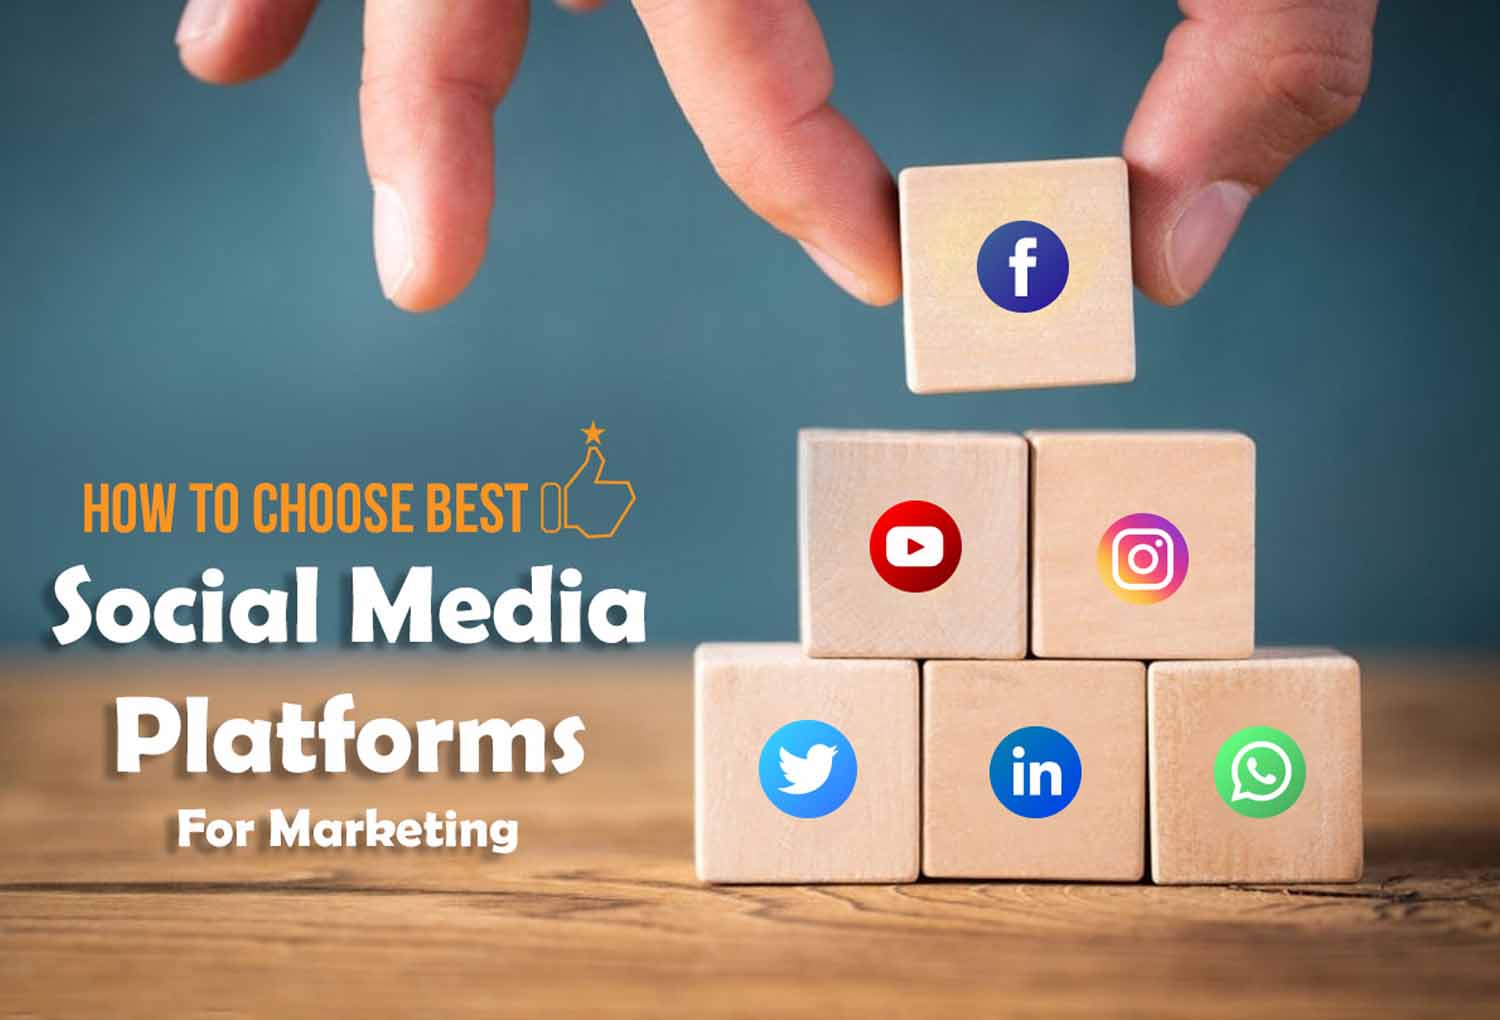 How to choose the best Social Media Marketing Platforms